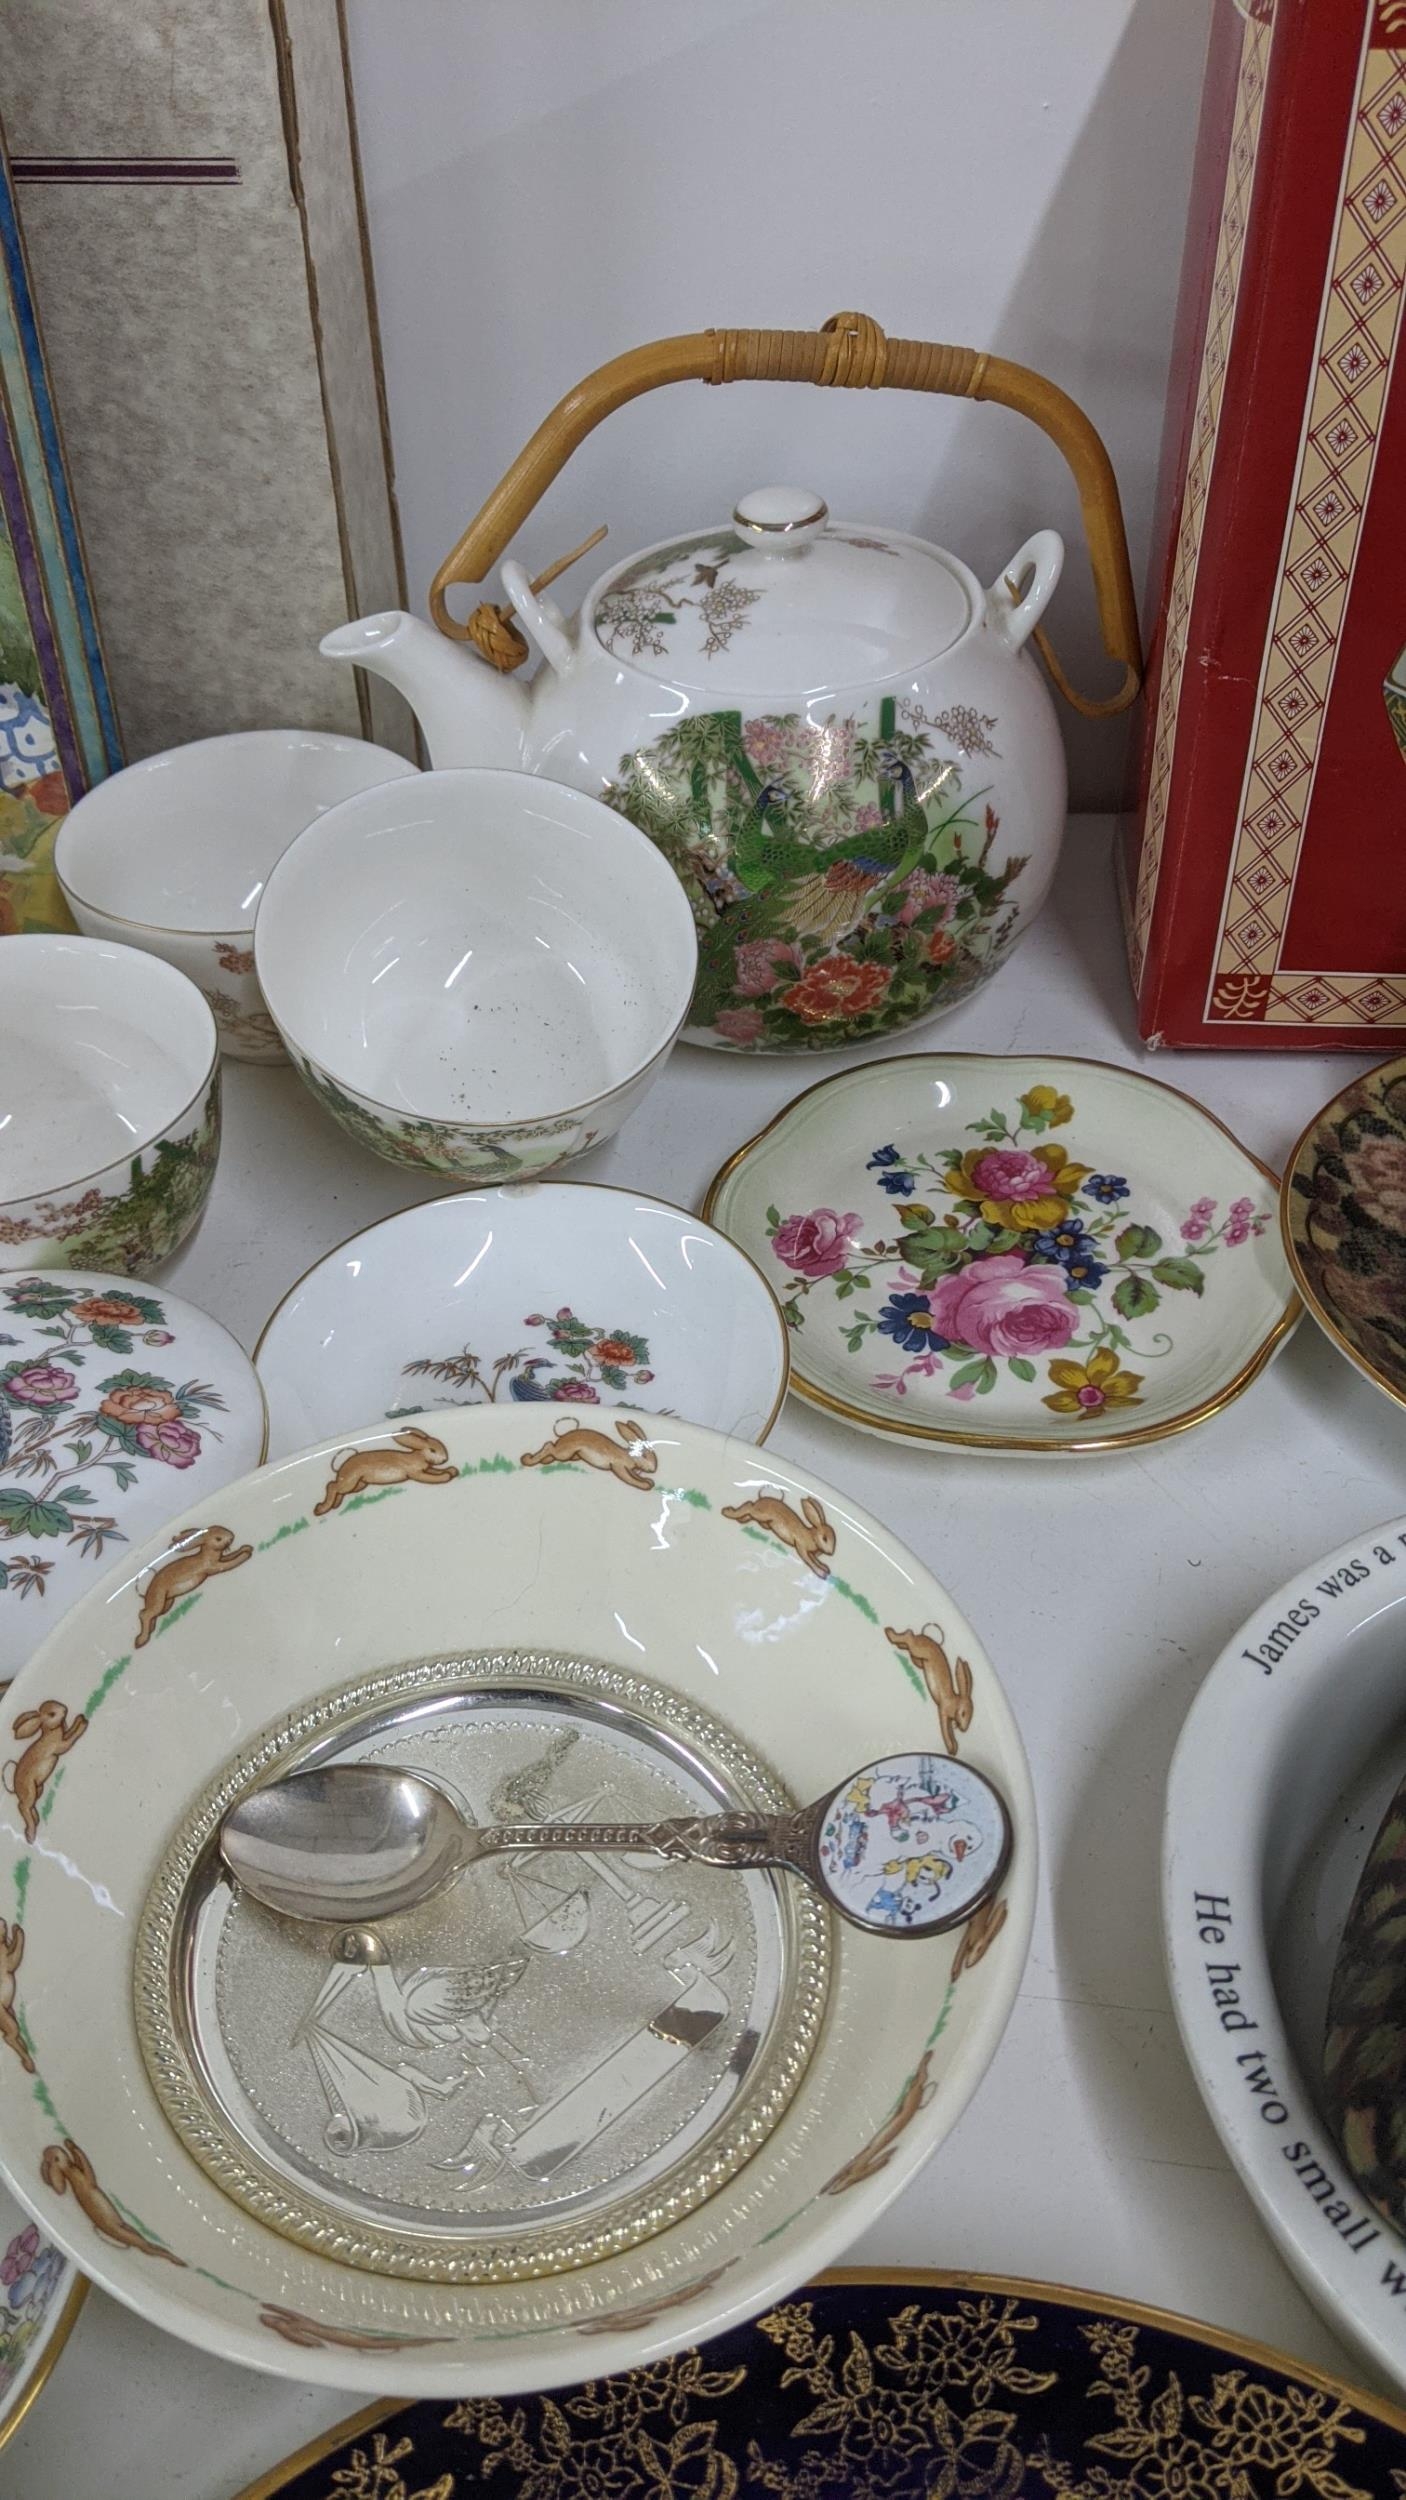 A mixed lot to include wooden ducks, mixed silver plate to include a pierced oval shaped bowl, - Image 12 of 12